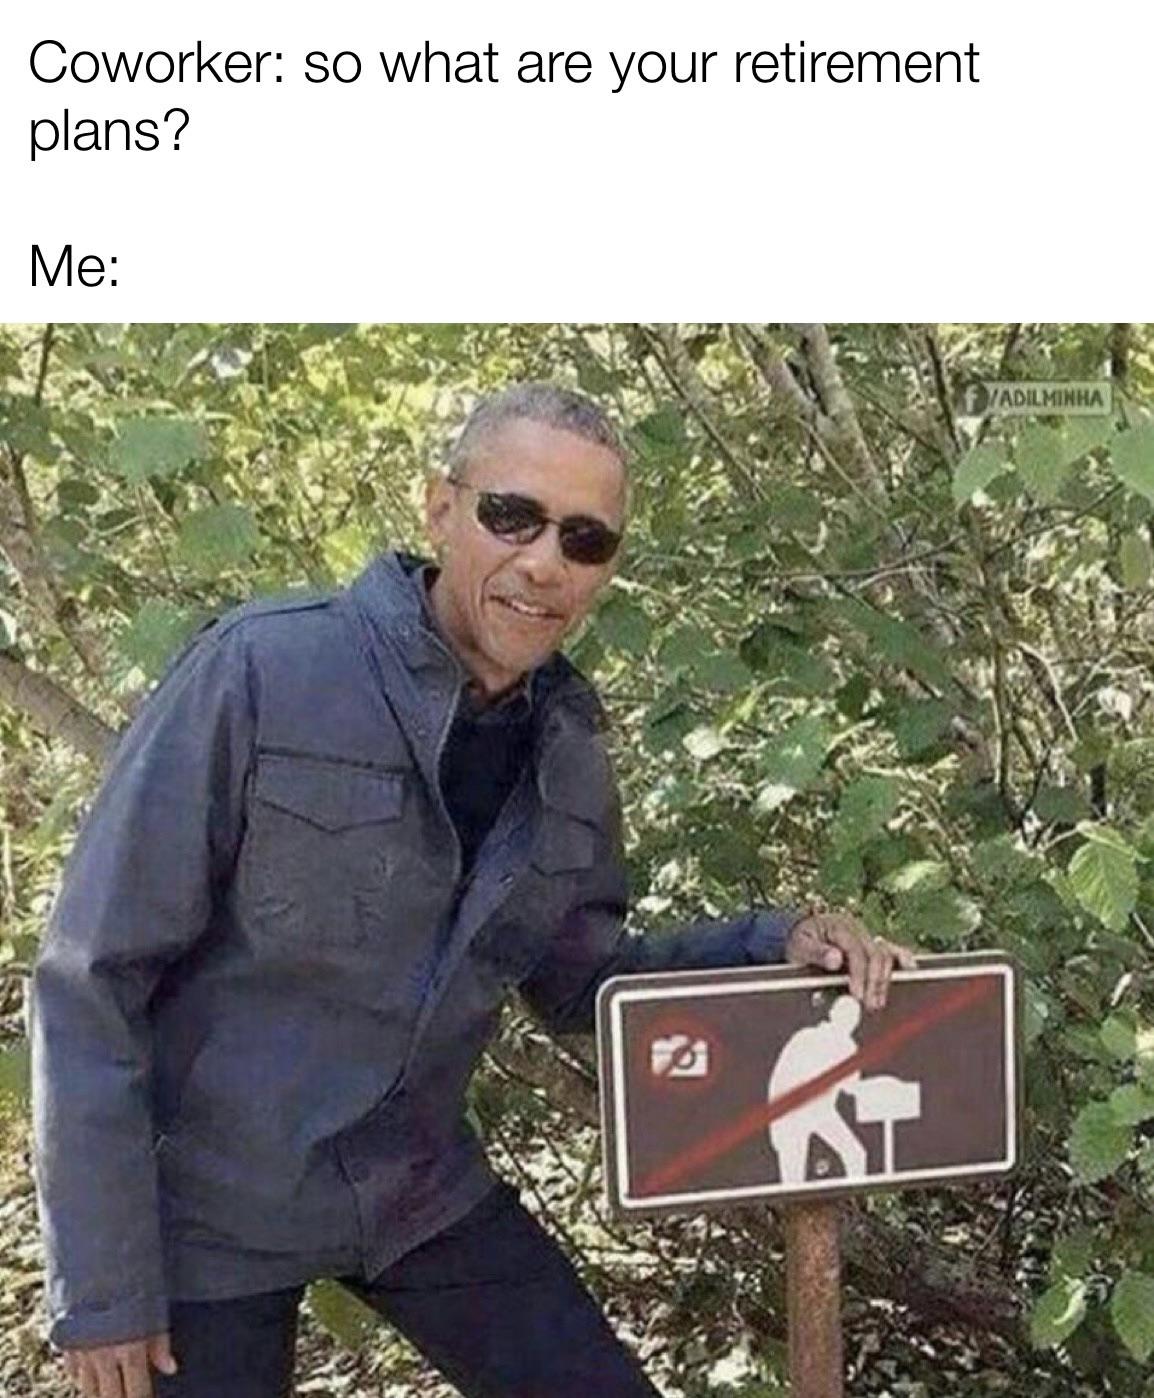 wholesome obama memes - Coworker so what are your retirement plans? Me Yadilminha